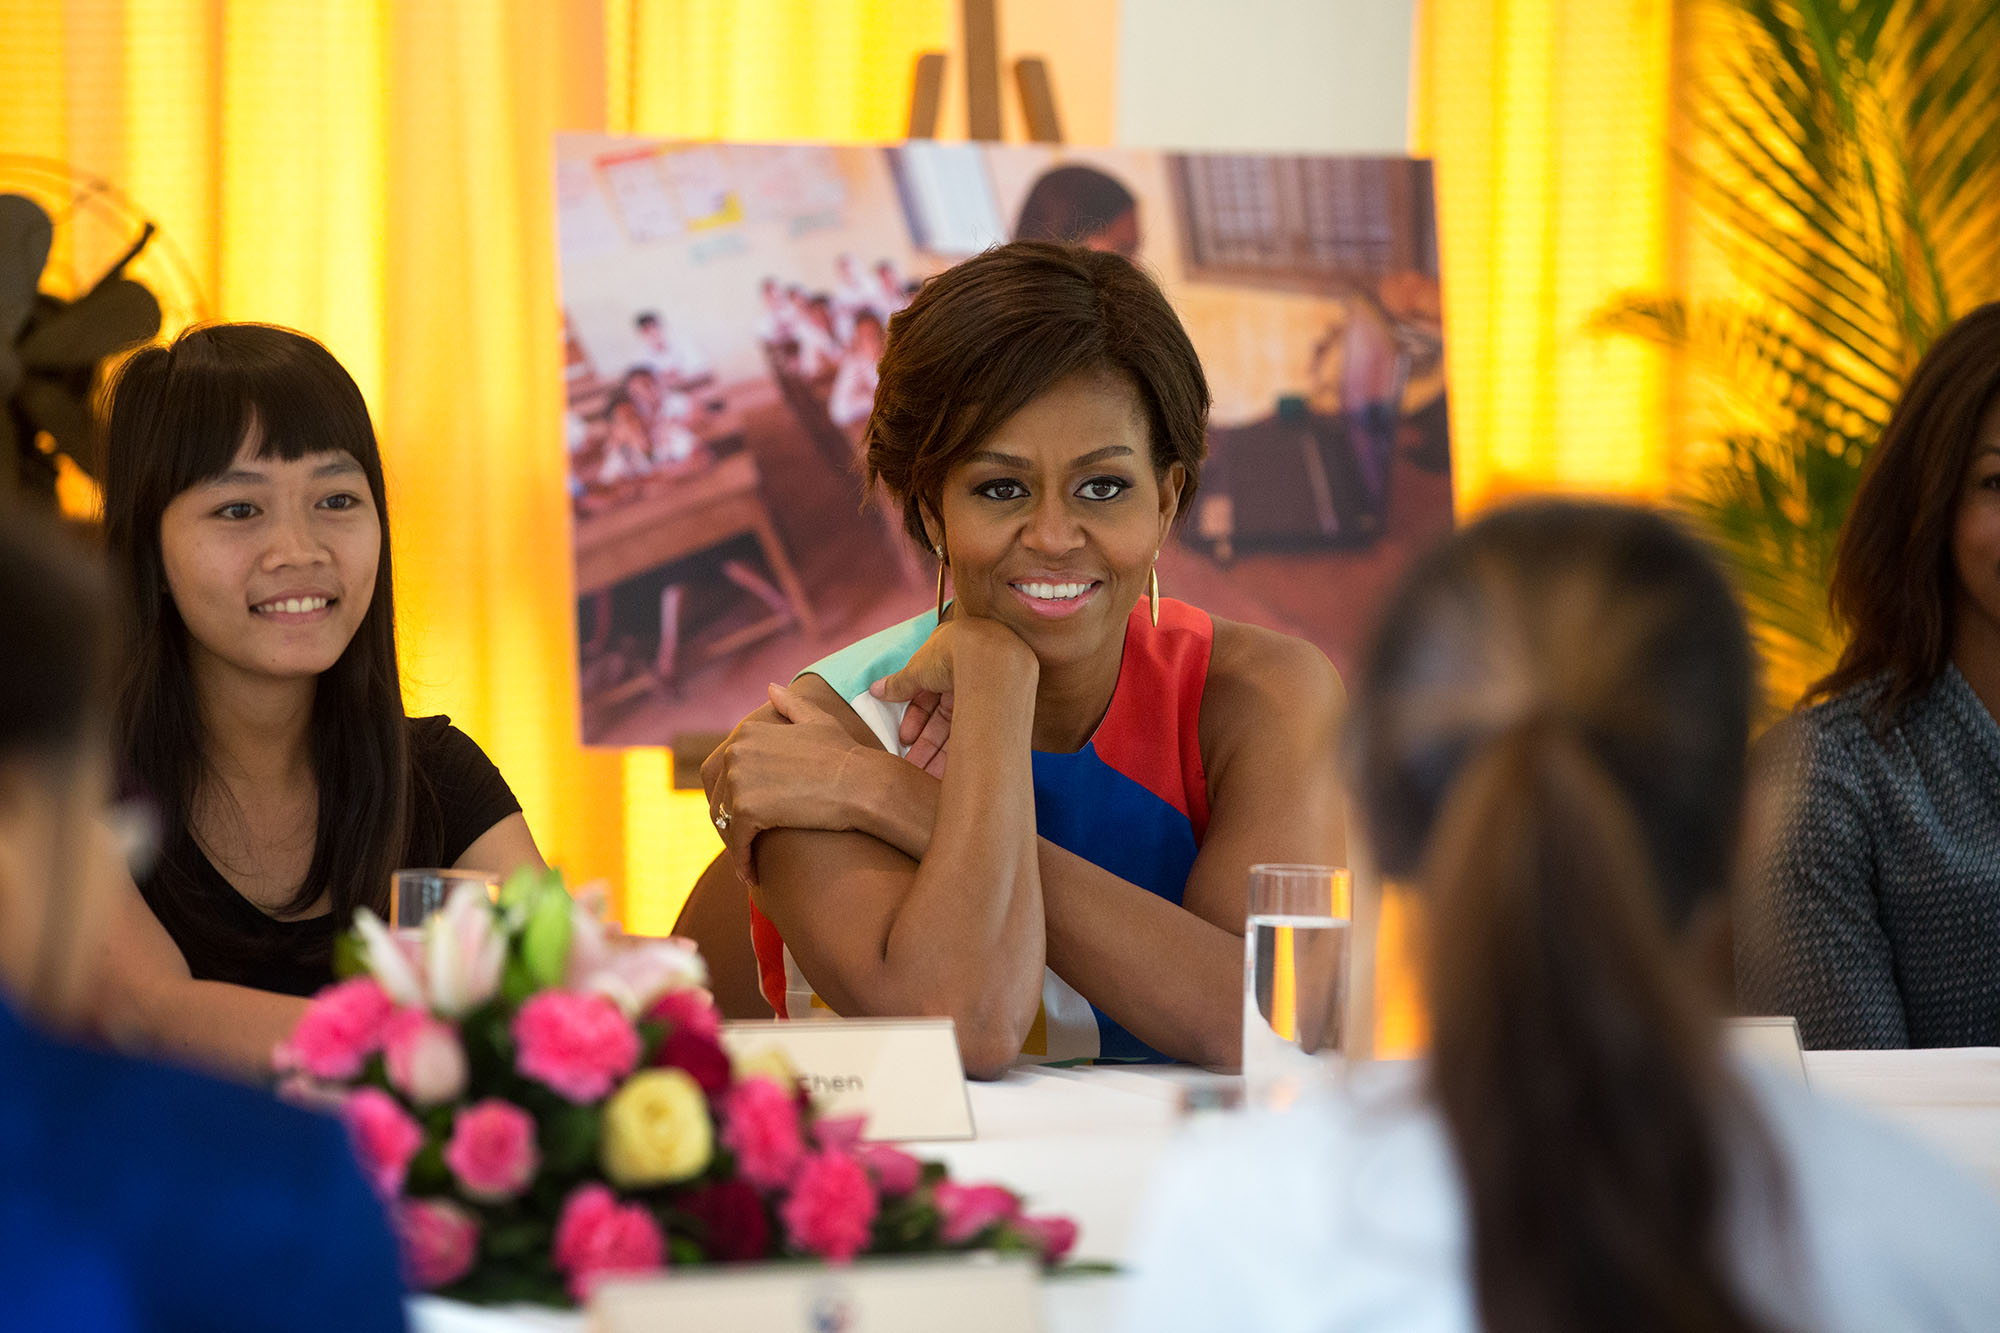 The First Lady participates in a roundtable discussion regarding the "Let Girls Learn" initiative. (Official White House Photo by Amanda Lucidon)